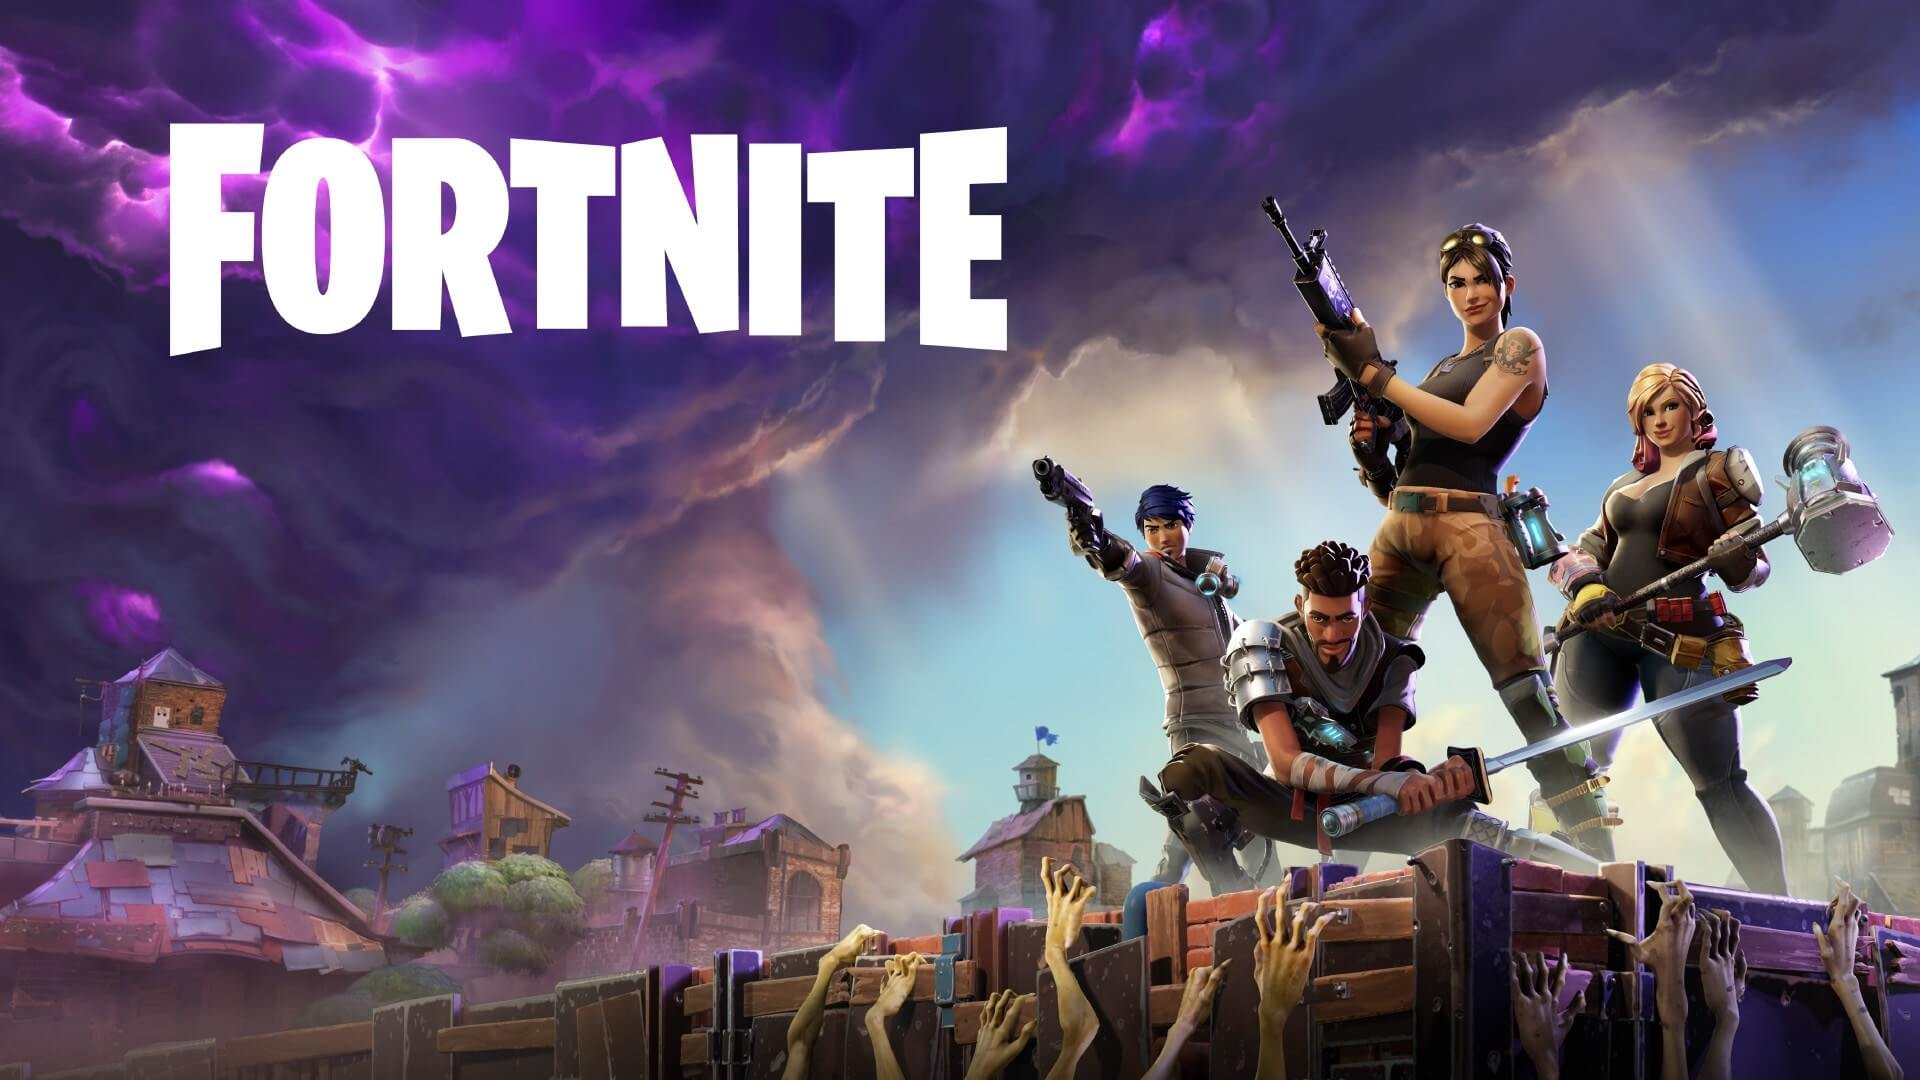 Lessons in Business Learned From Fortnite